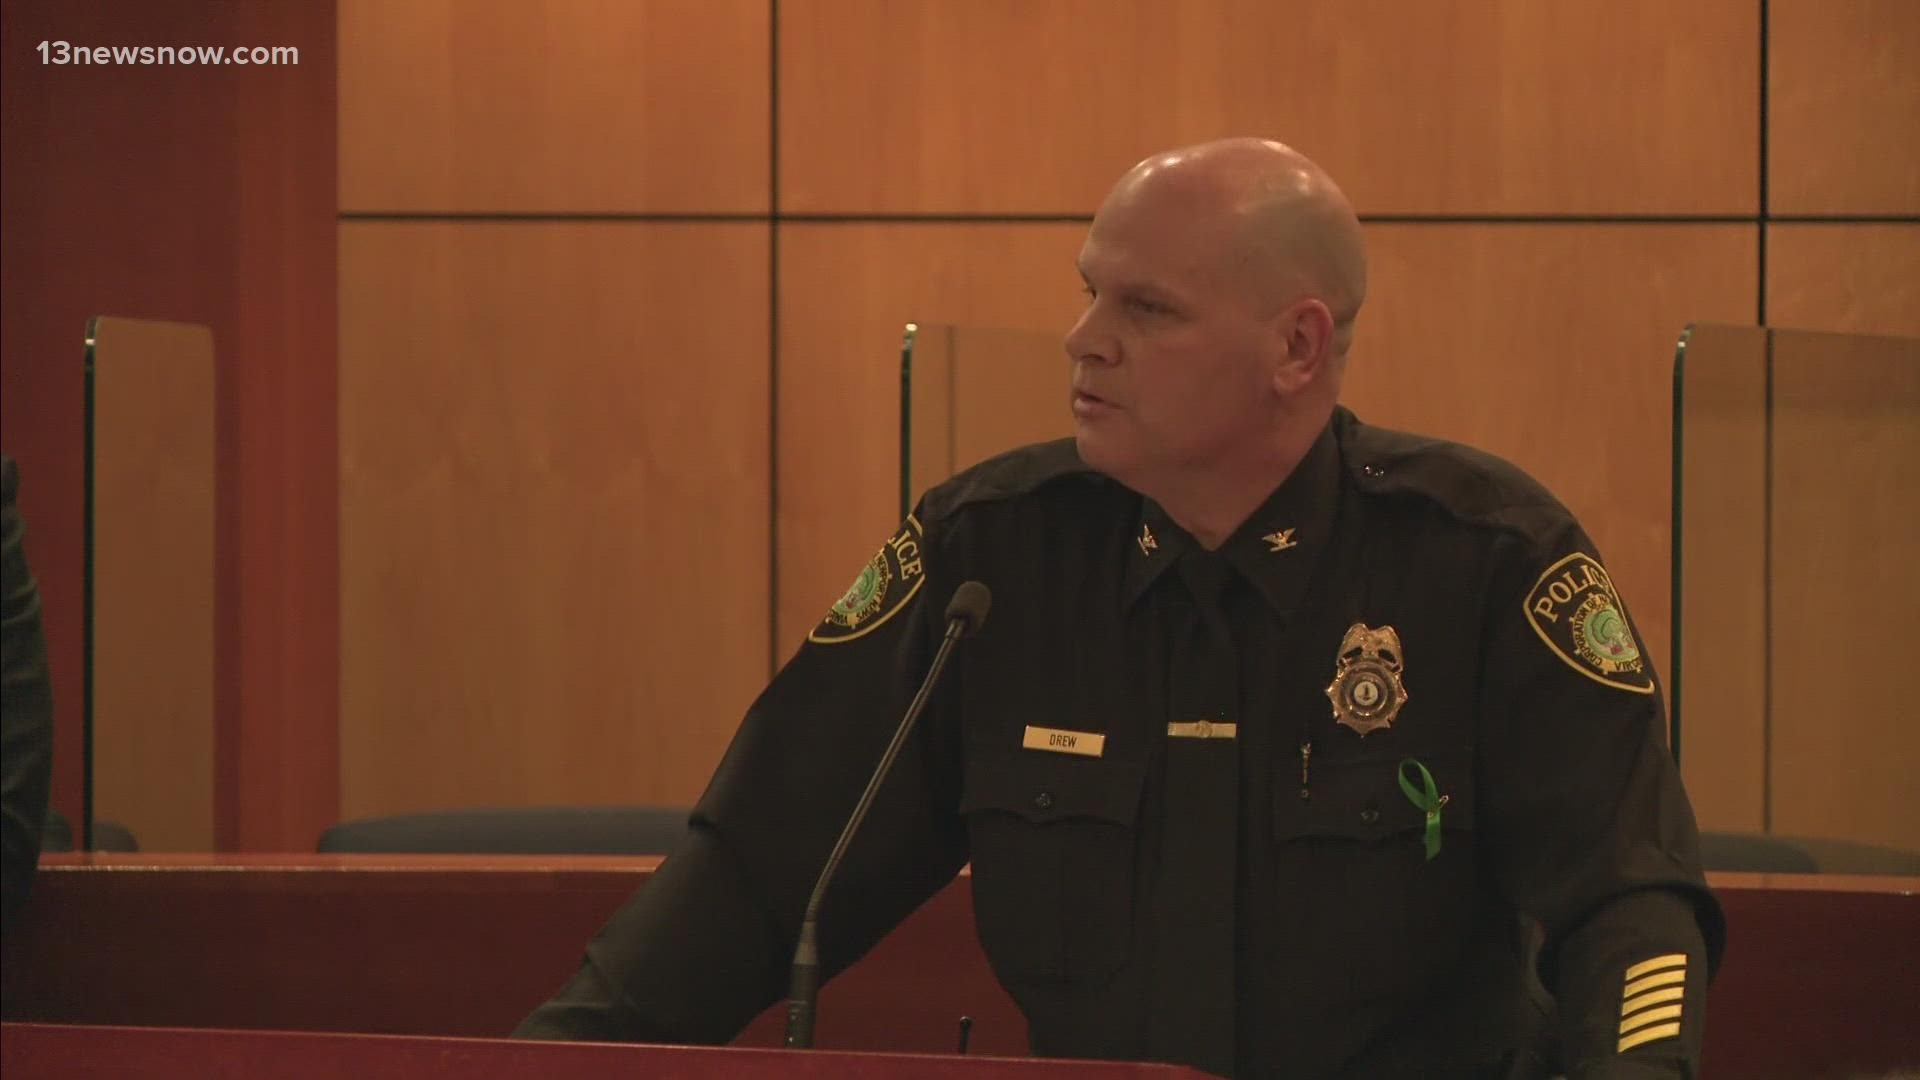 Newport News Police Chief Steve Drew on Monday offered the first description of how the shooting happened.